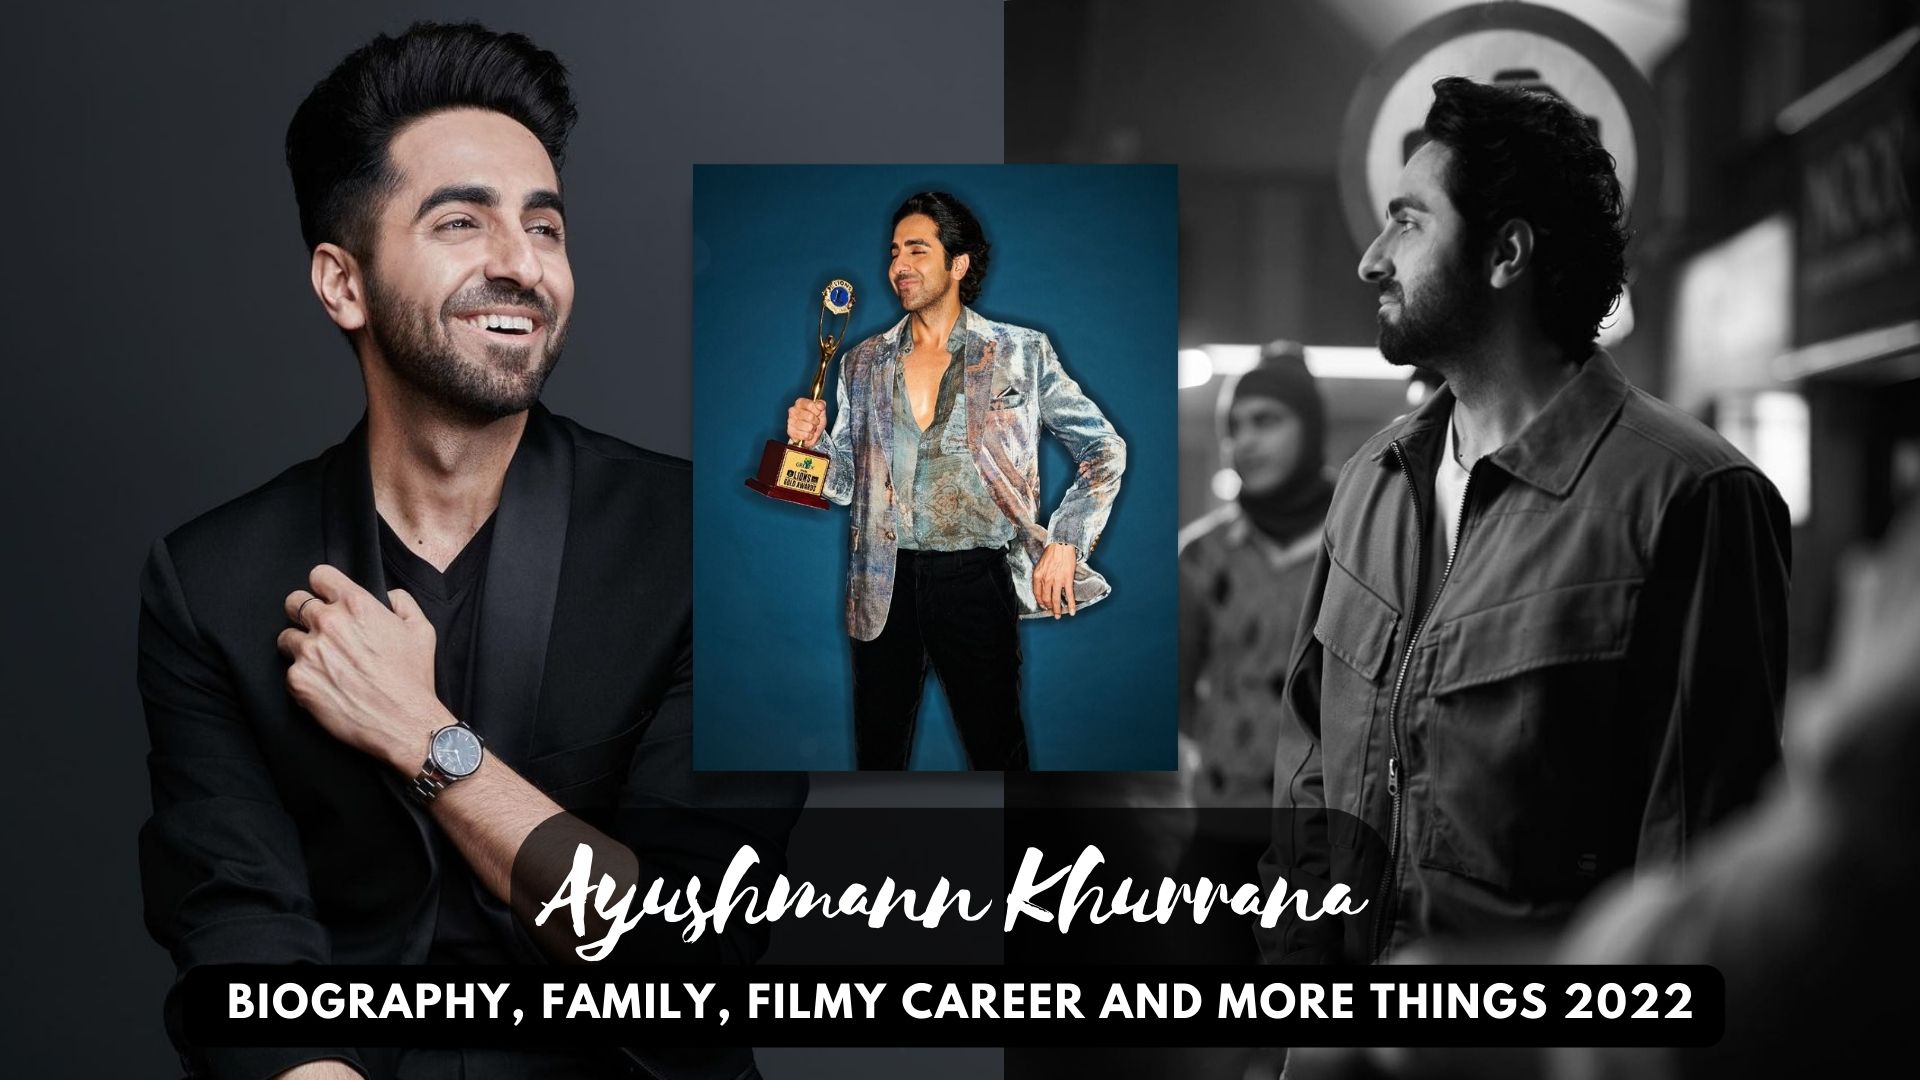 Ayushmann Khurrana Biography, Family, Filmy Career and More things 2022